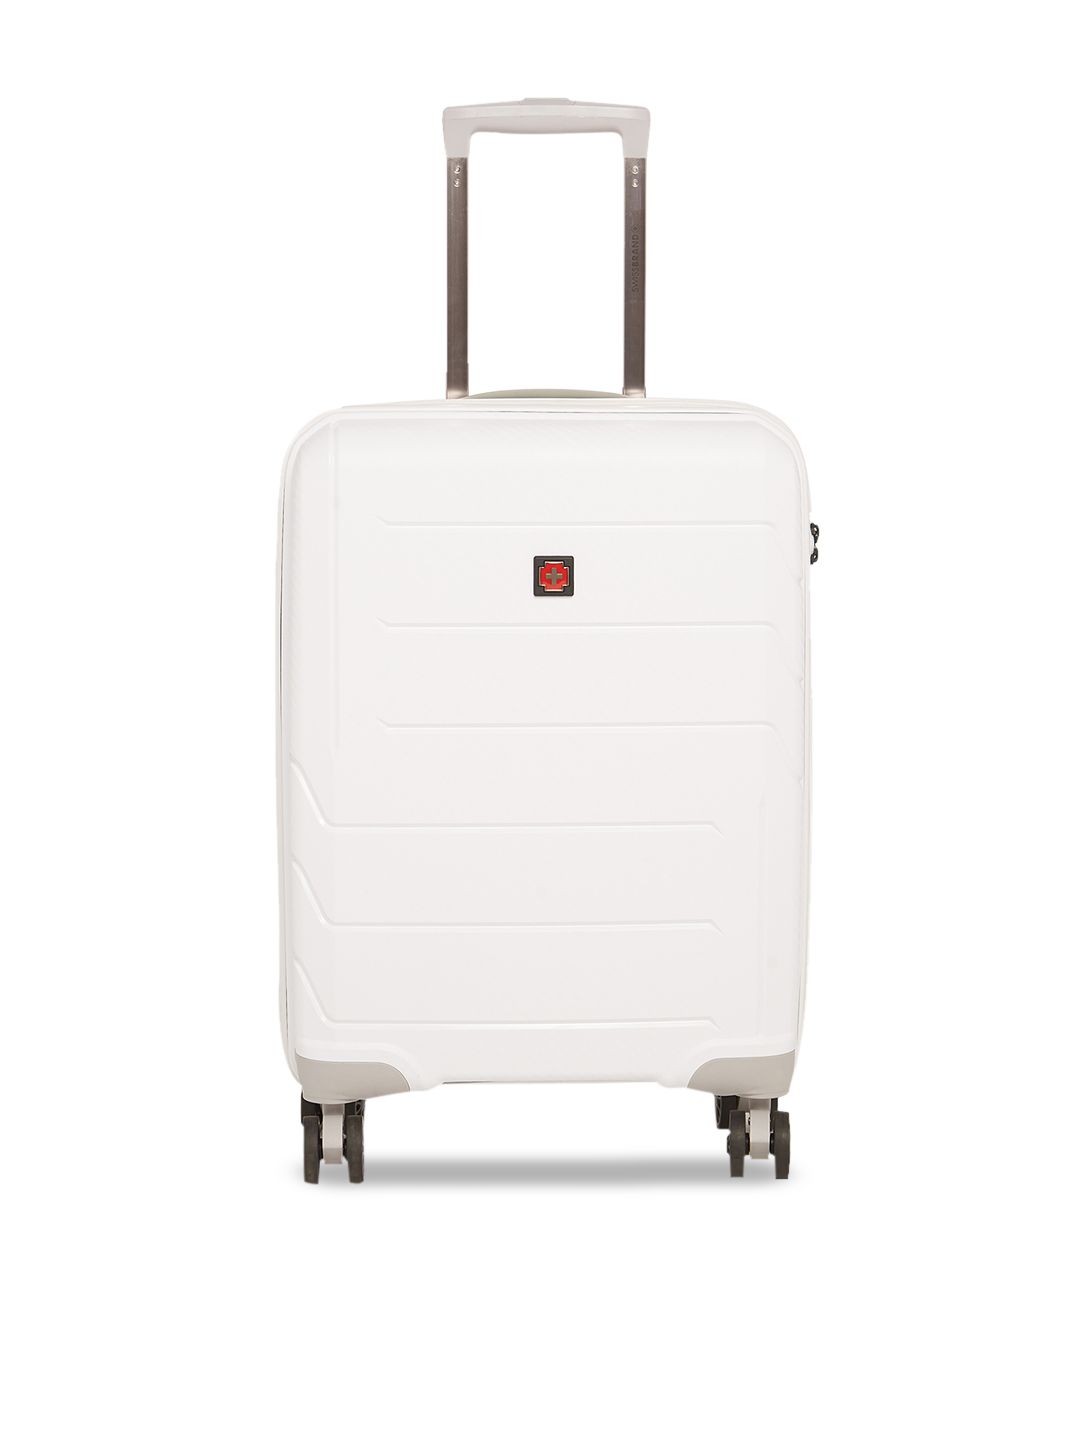 SWISS BRAND White Solid MATTERHORN 360-Degree Rotation Hard-Sided Cabin Trolley Suitcase Price in India